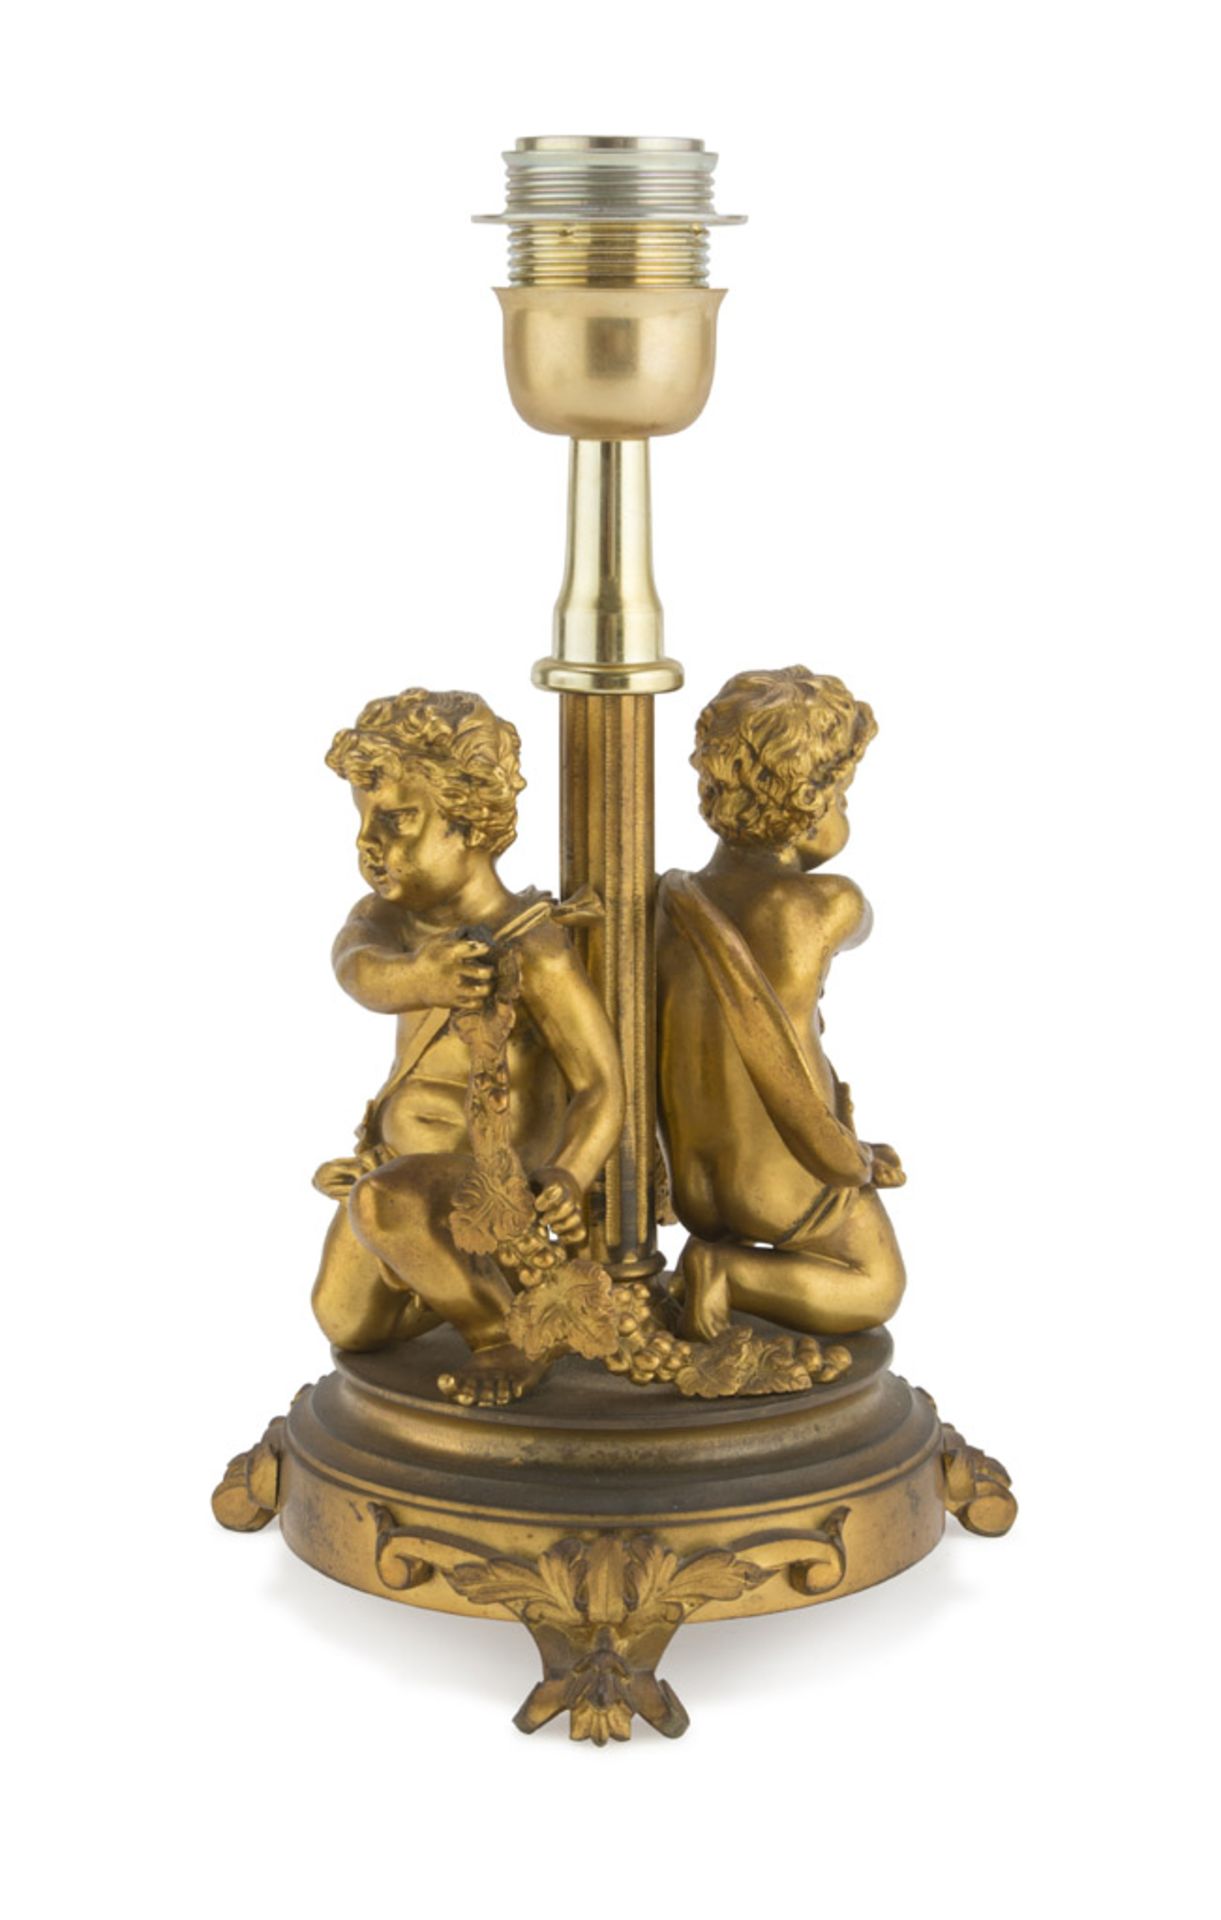 LAMP IN BRONZE, EARLY 20TH CENTURY with figures of putti. Round leafy base. Measures cm. 20 x 16.